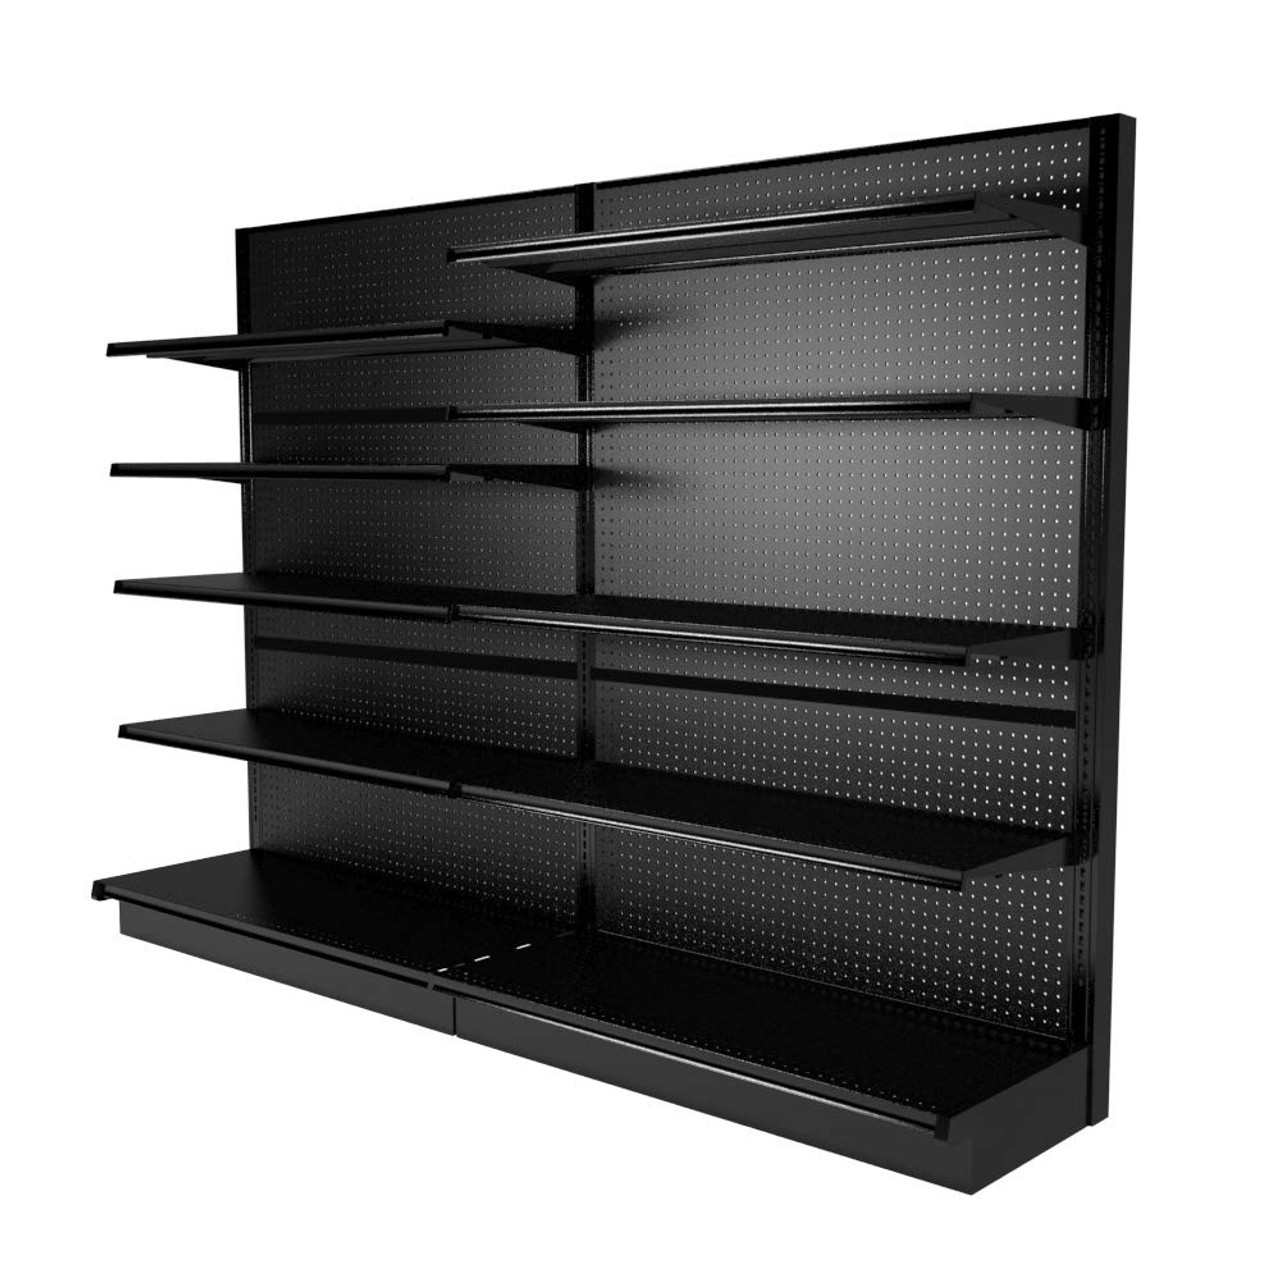 Wood Gondola Shelving Wall Unit With 4 Shelves For Sale Today